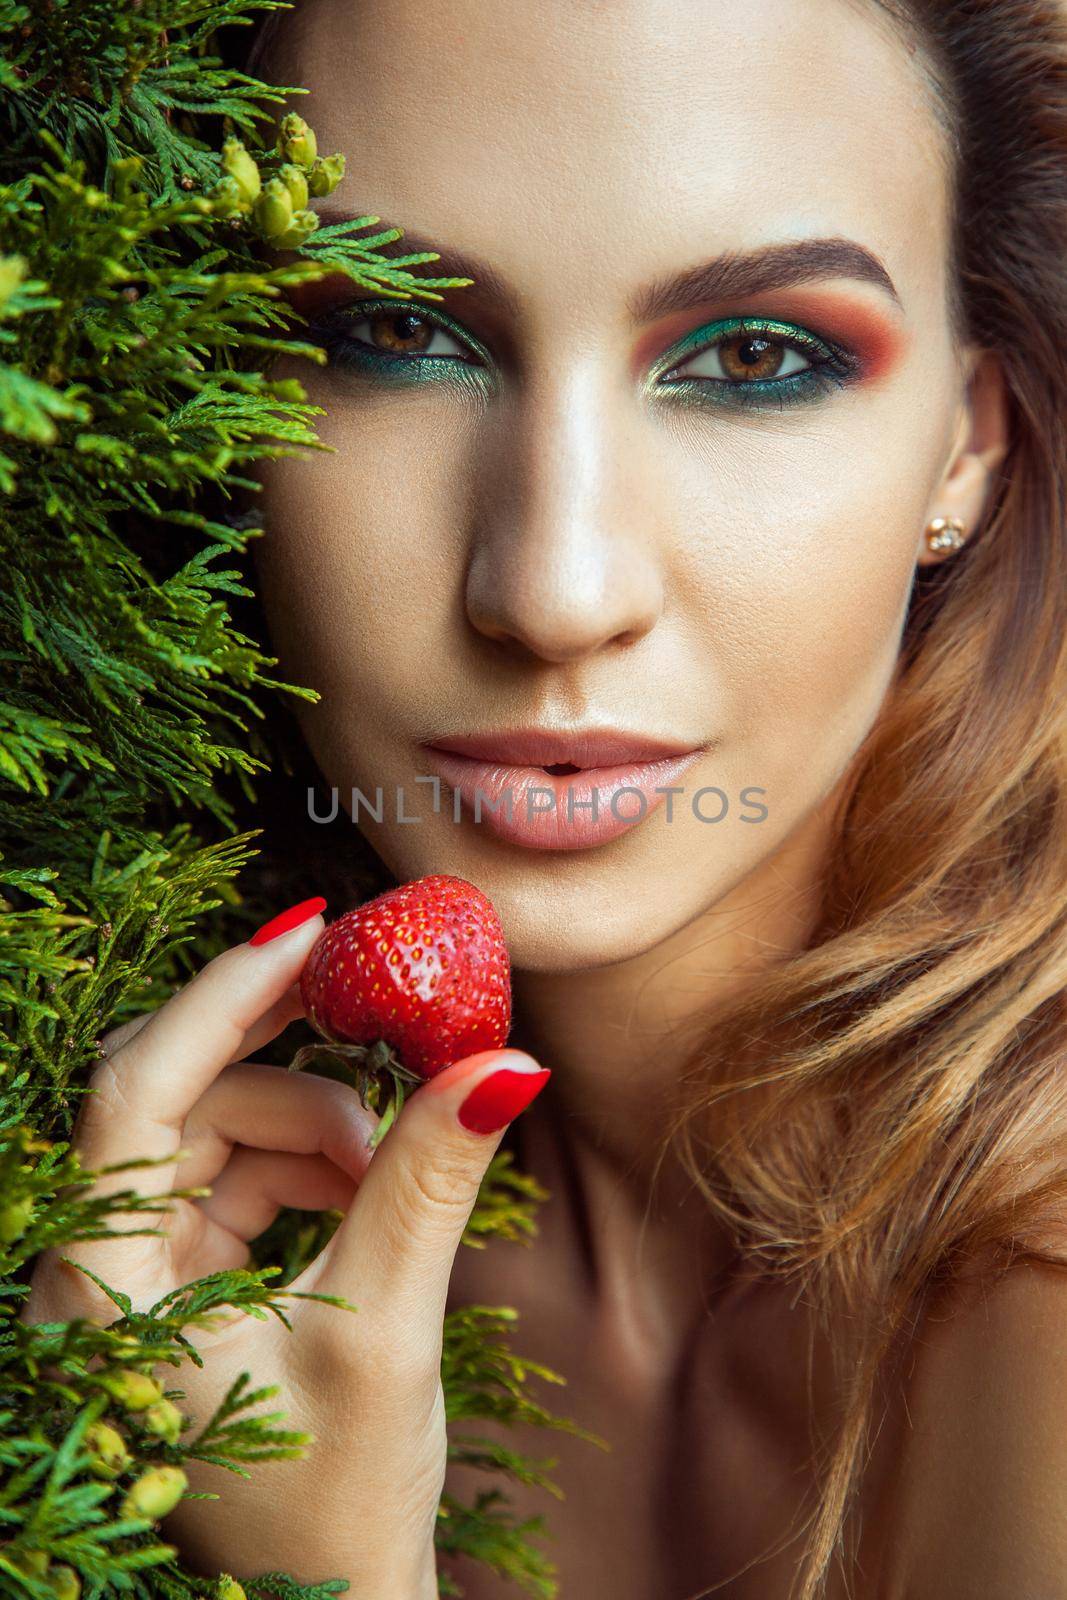 Handsome model with perfect green makeup looking at camera by Khosro1